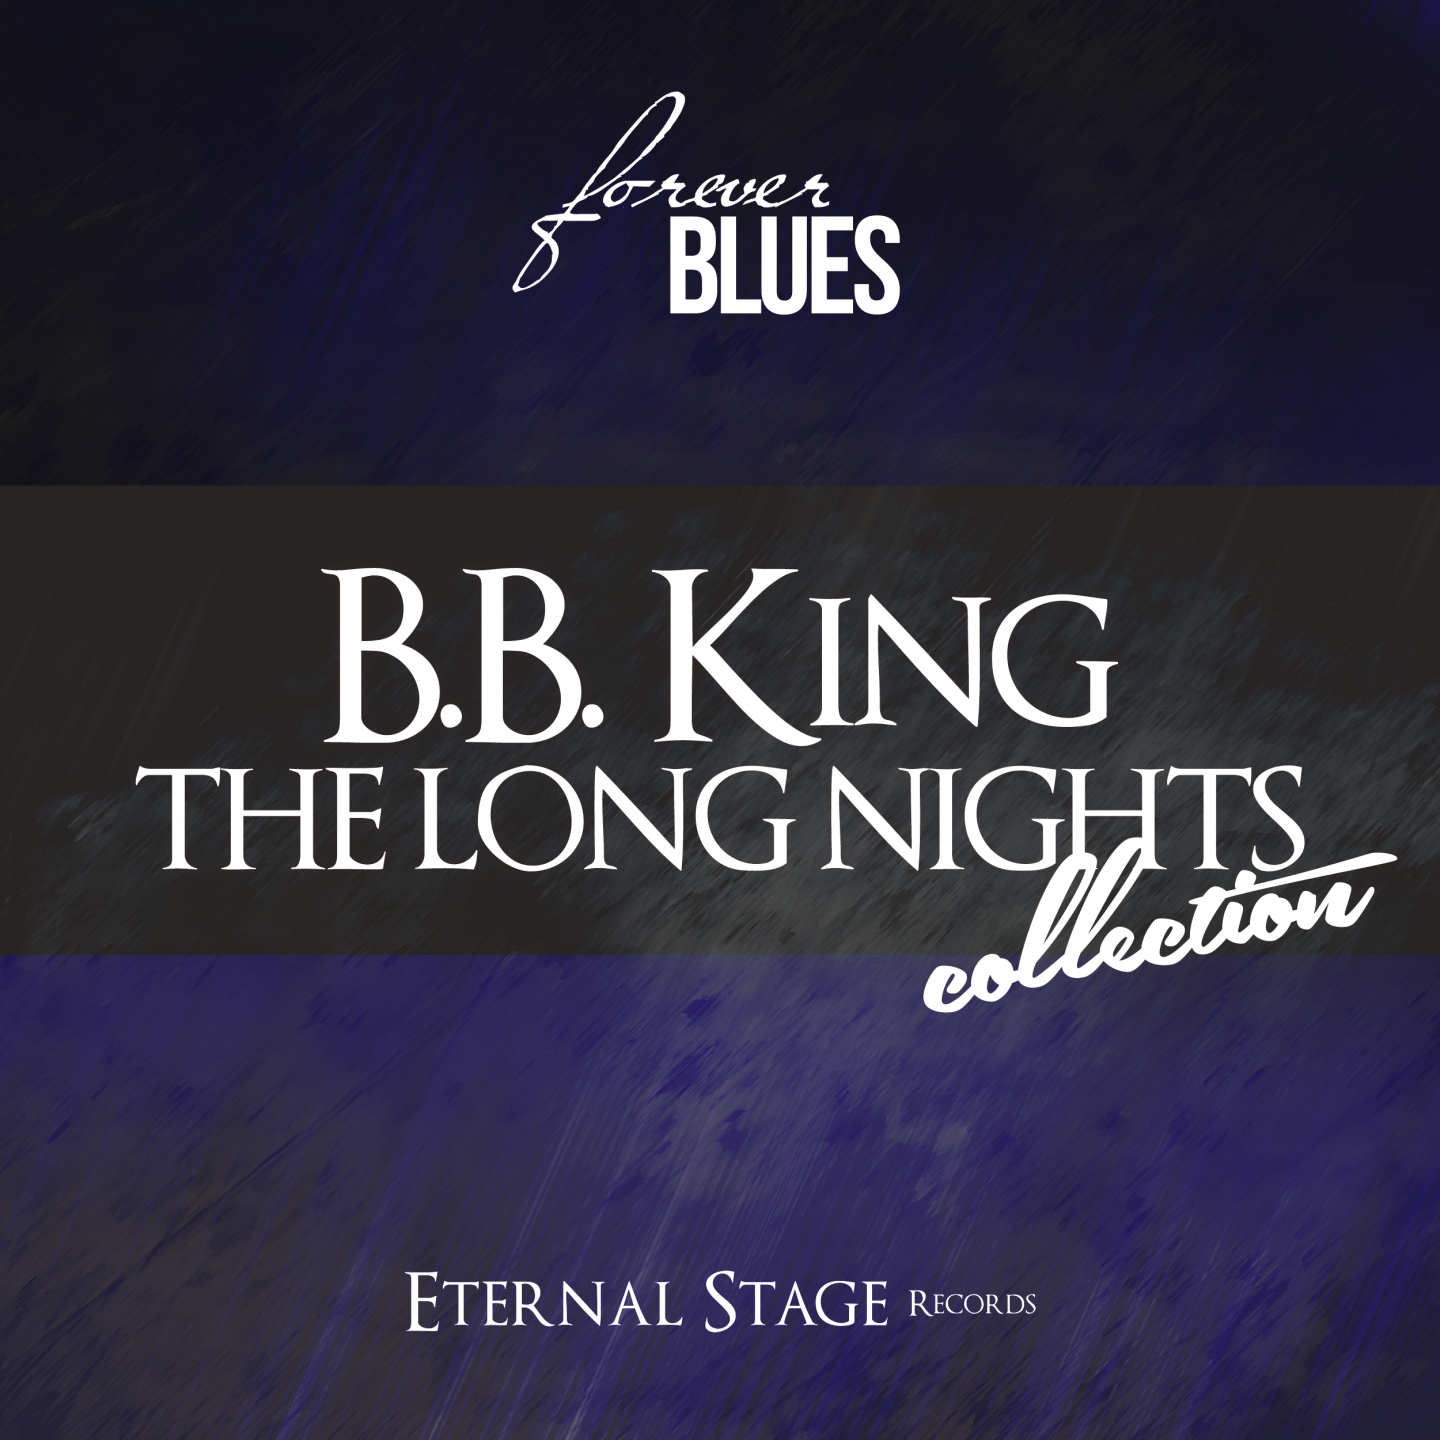 The Long Nights Collection (Forever Blues)